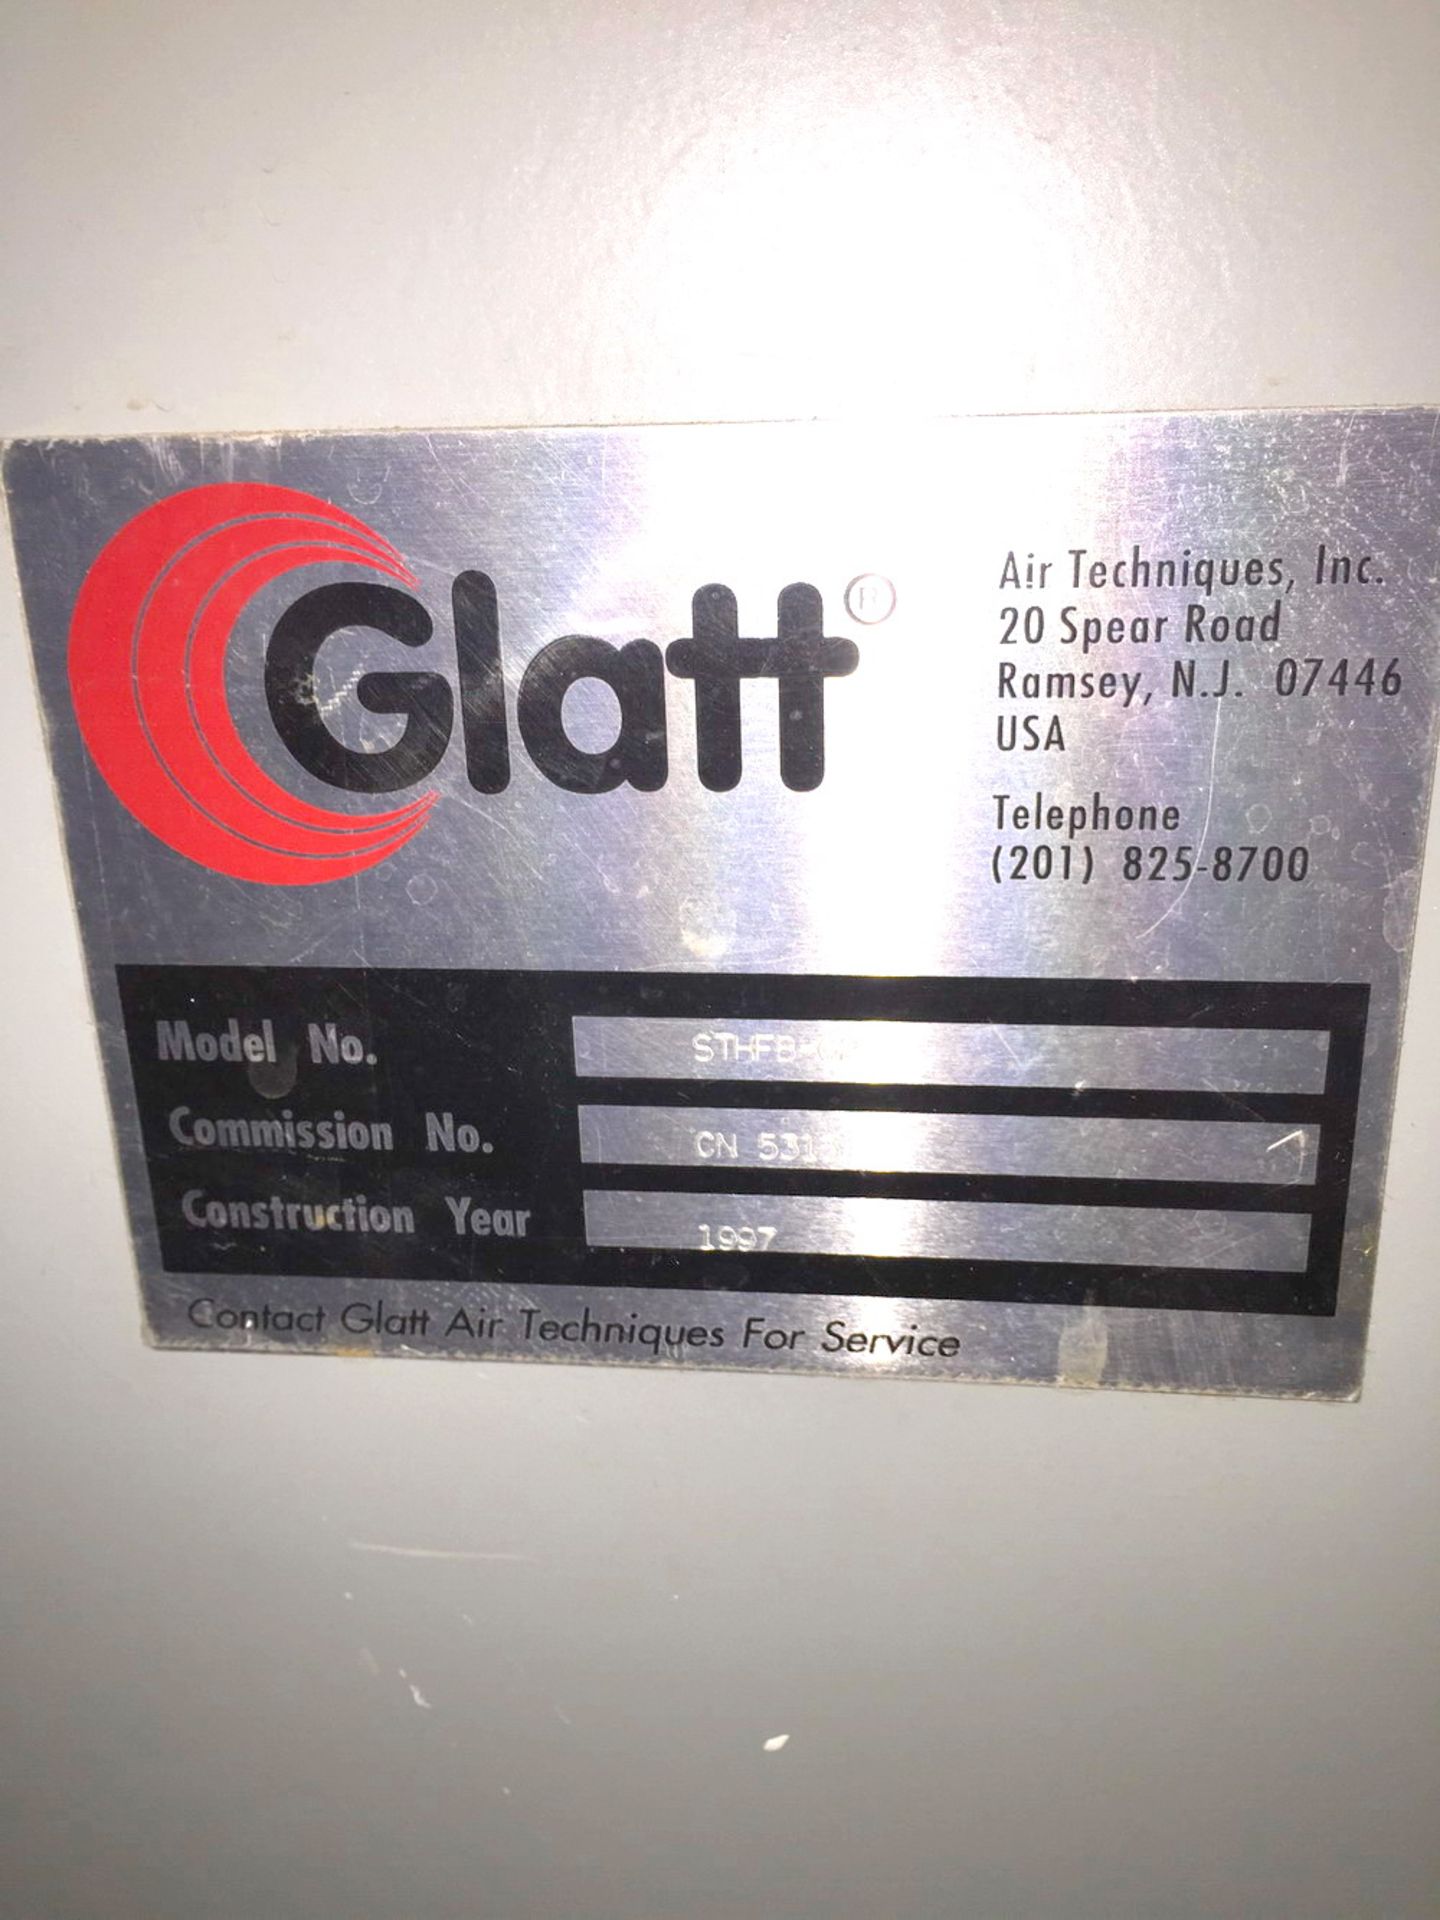 Glatt Fluid Bed Granulator with 9" Wurster, 22L and 45L Drying Inserts, Model GPCG-15, SN 5313. - Image 19 of 25